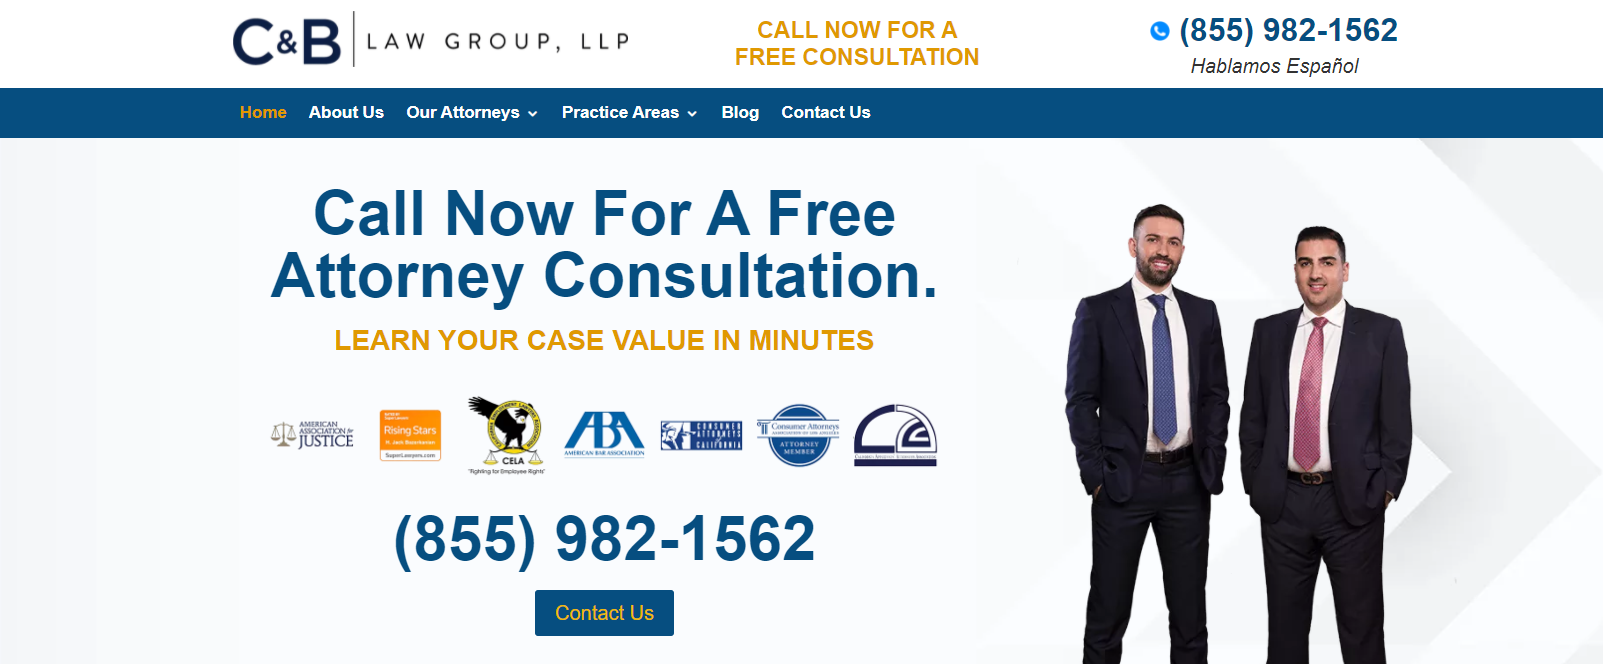 C&Law Group, LLP